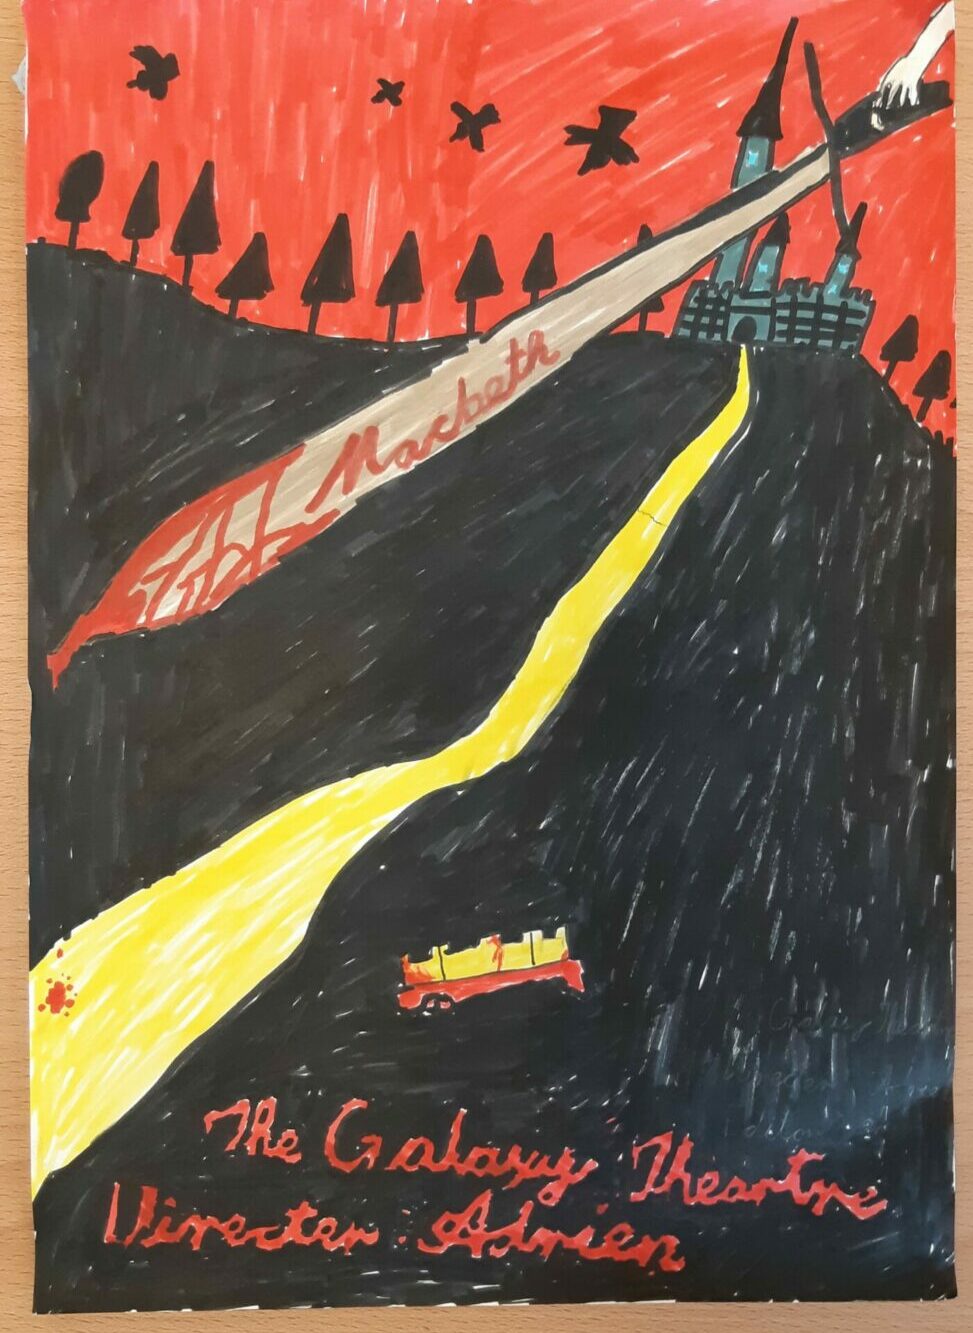 A black, red and yellow illustrative poster for Macbeth